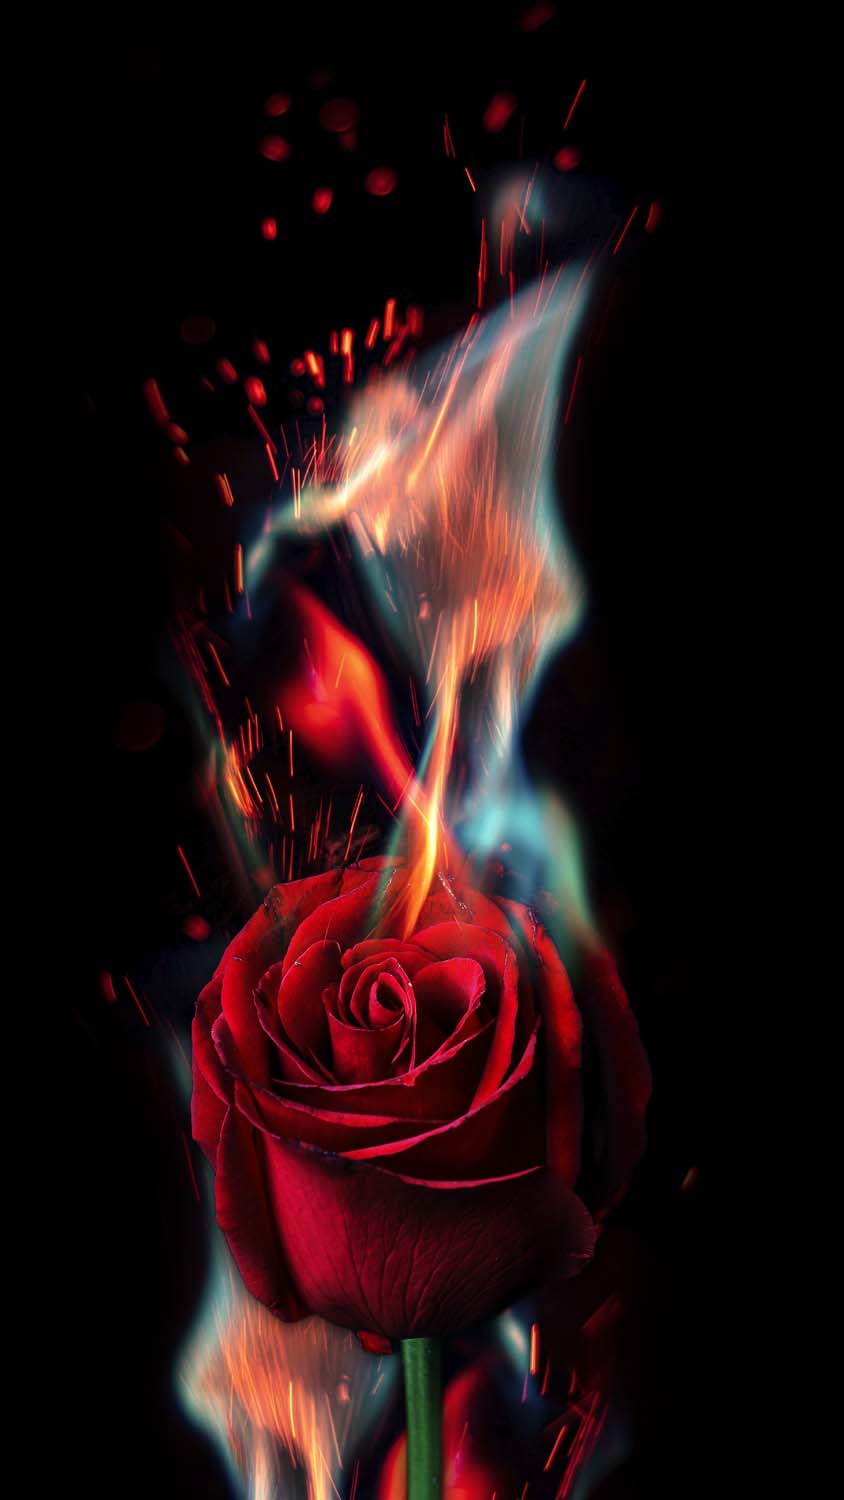 Red Rose Fire IPhone Wallpaper HD - IPhone Wallpapers : iPhone Wallpapers